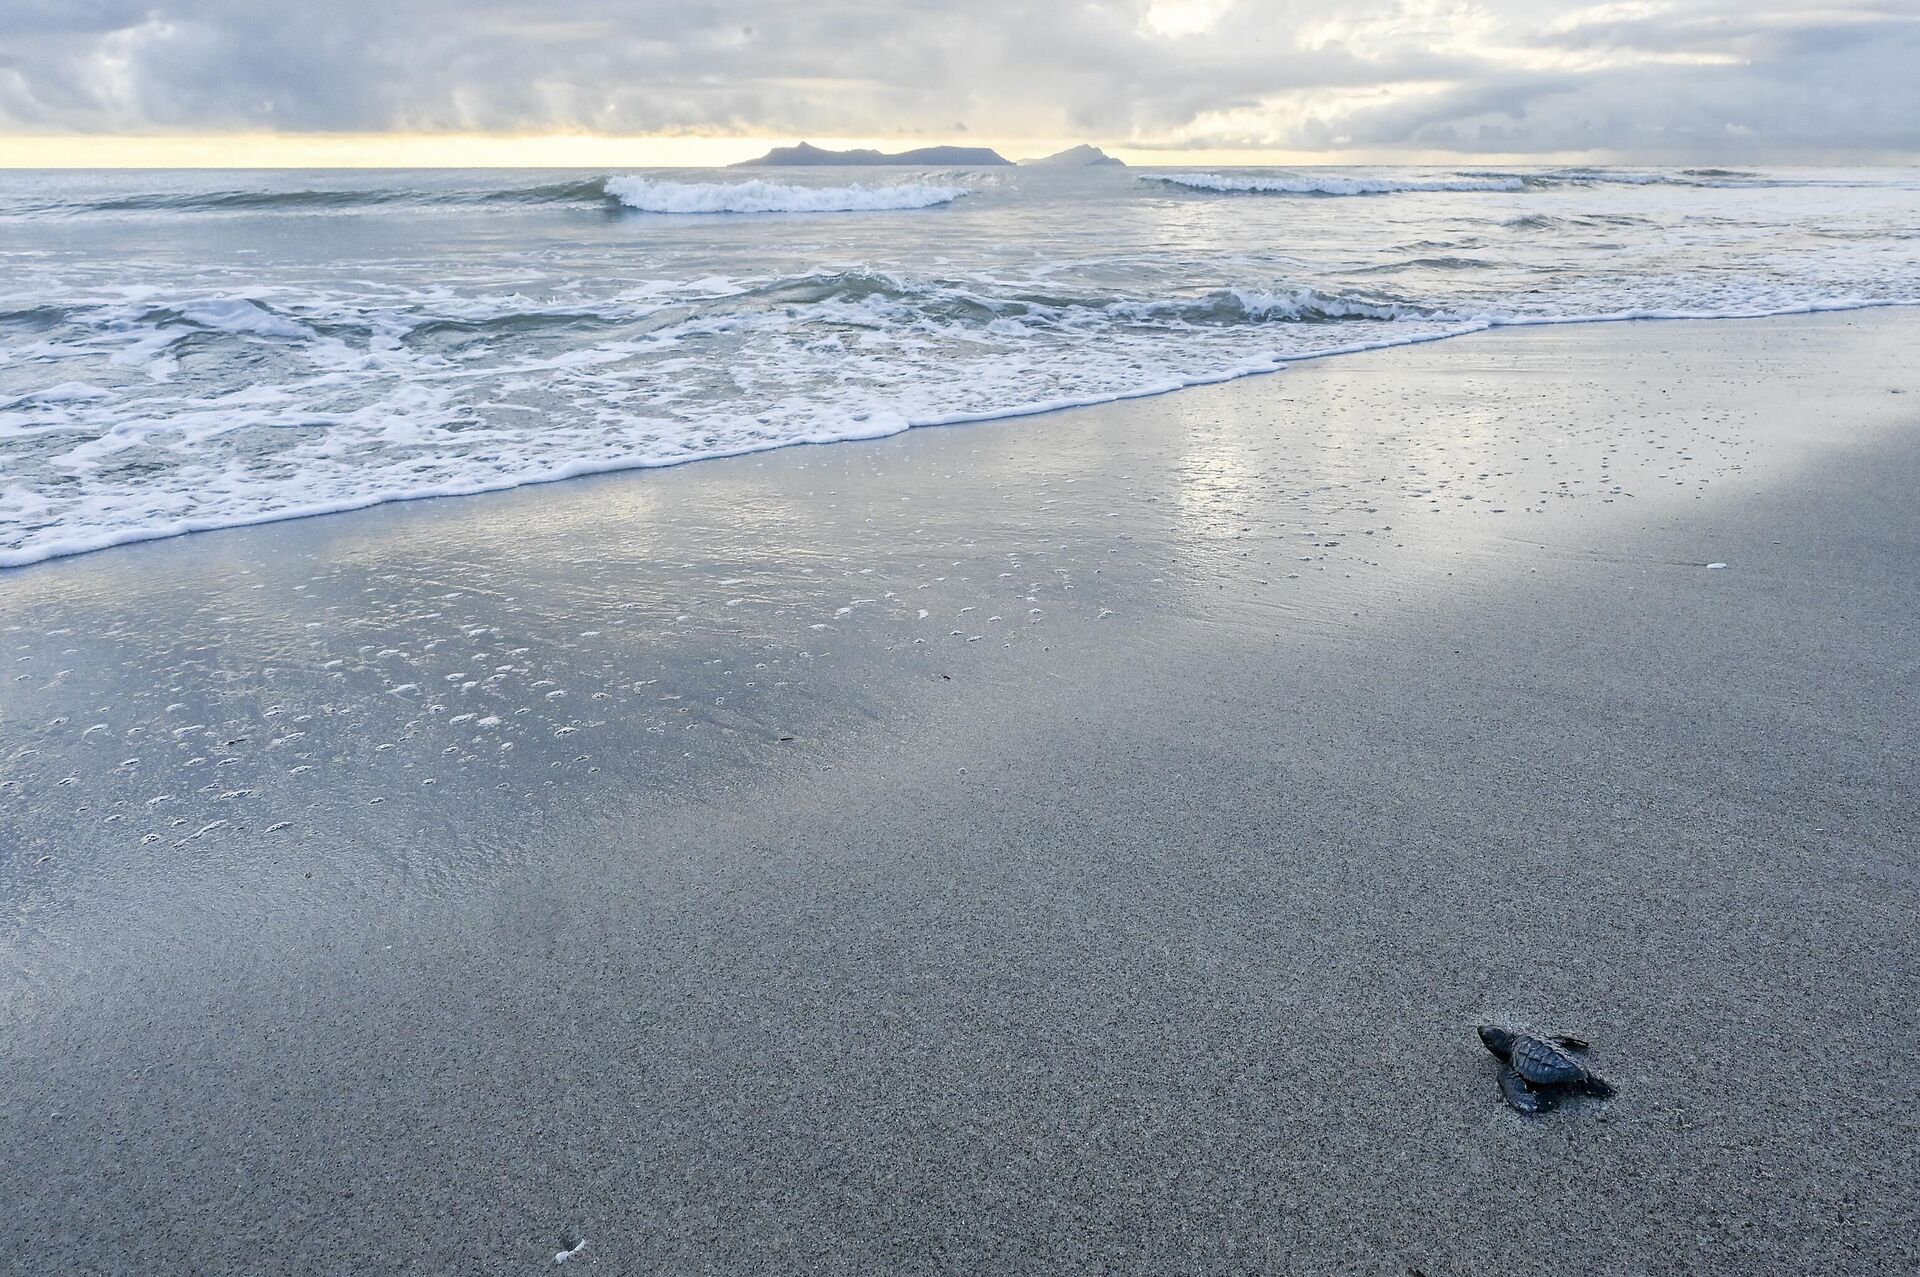 An Olive ridley turtle (Lepidochelys olivacea), also known as Lora turtle, heads to the sea after being released on the beach of Punta Chame, some 100 km south of Panama City, on November 13, 2022. - Sputnik International, 1920, 18.11.2022